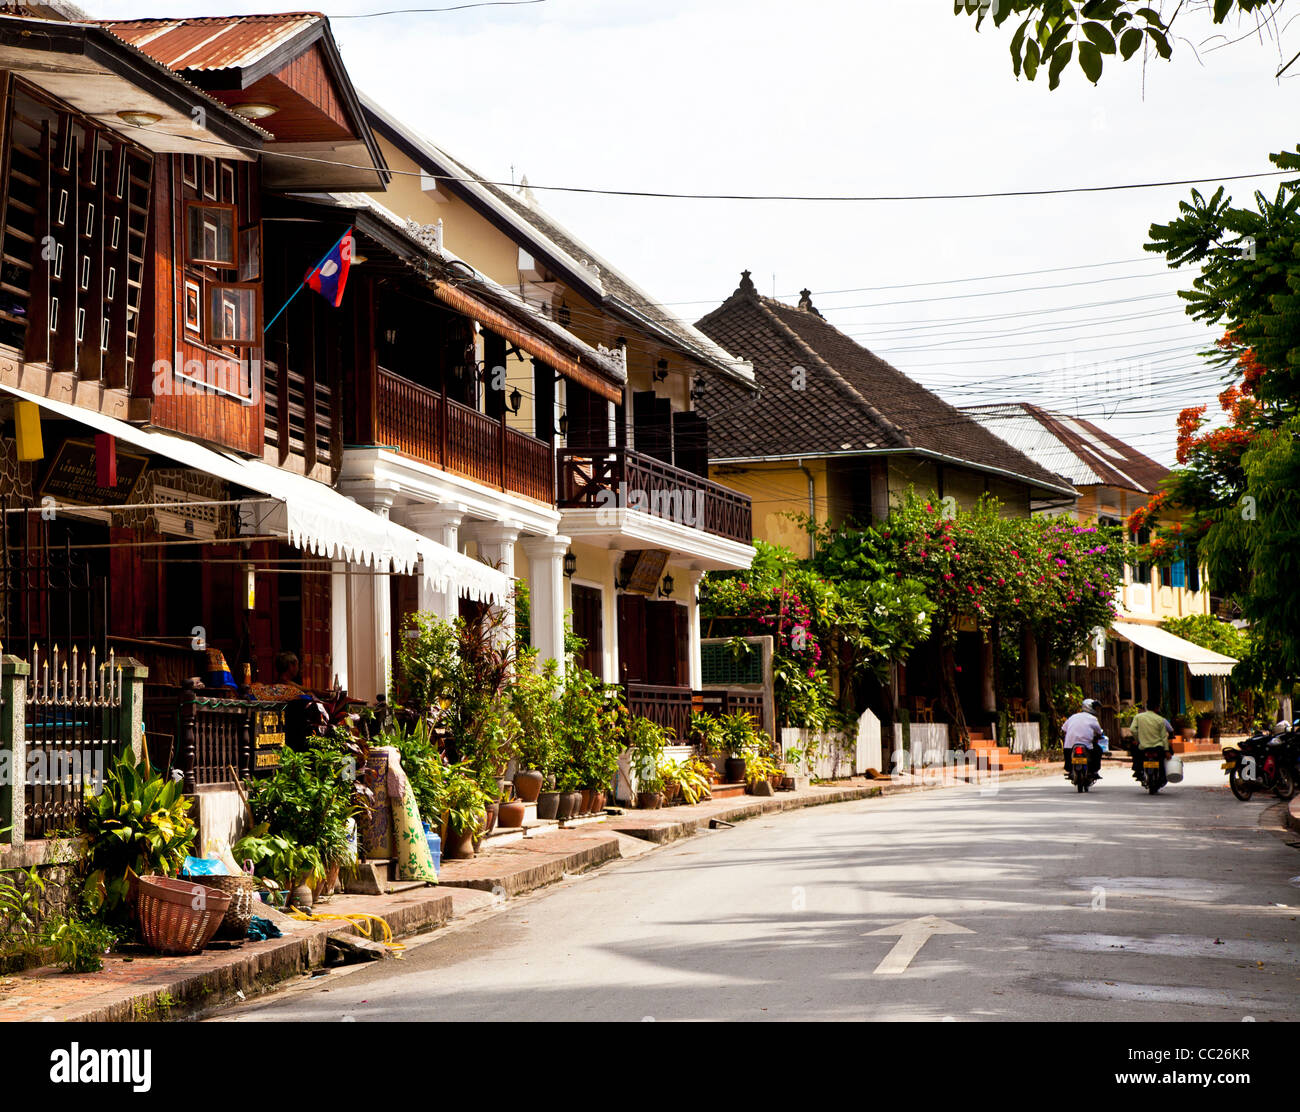 A street in Luang Prabang, Laos with French colonial architecture Stock Photo